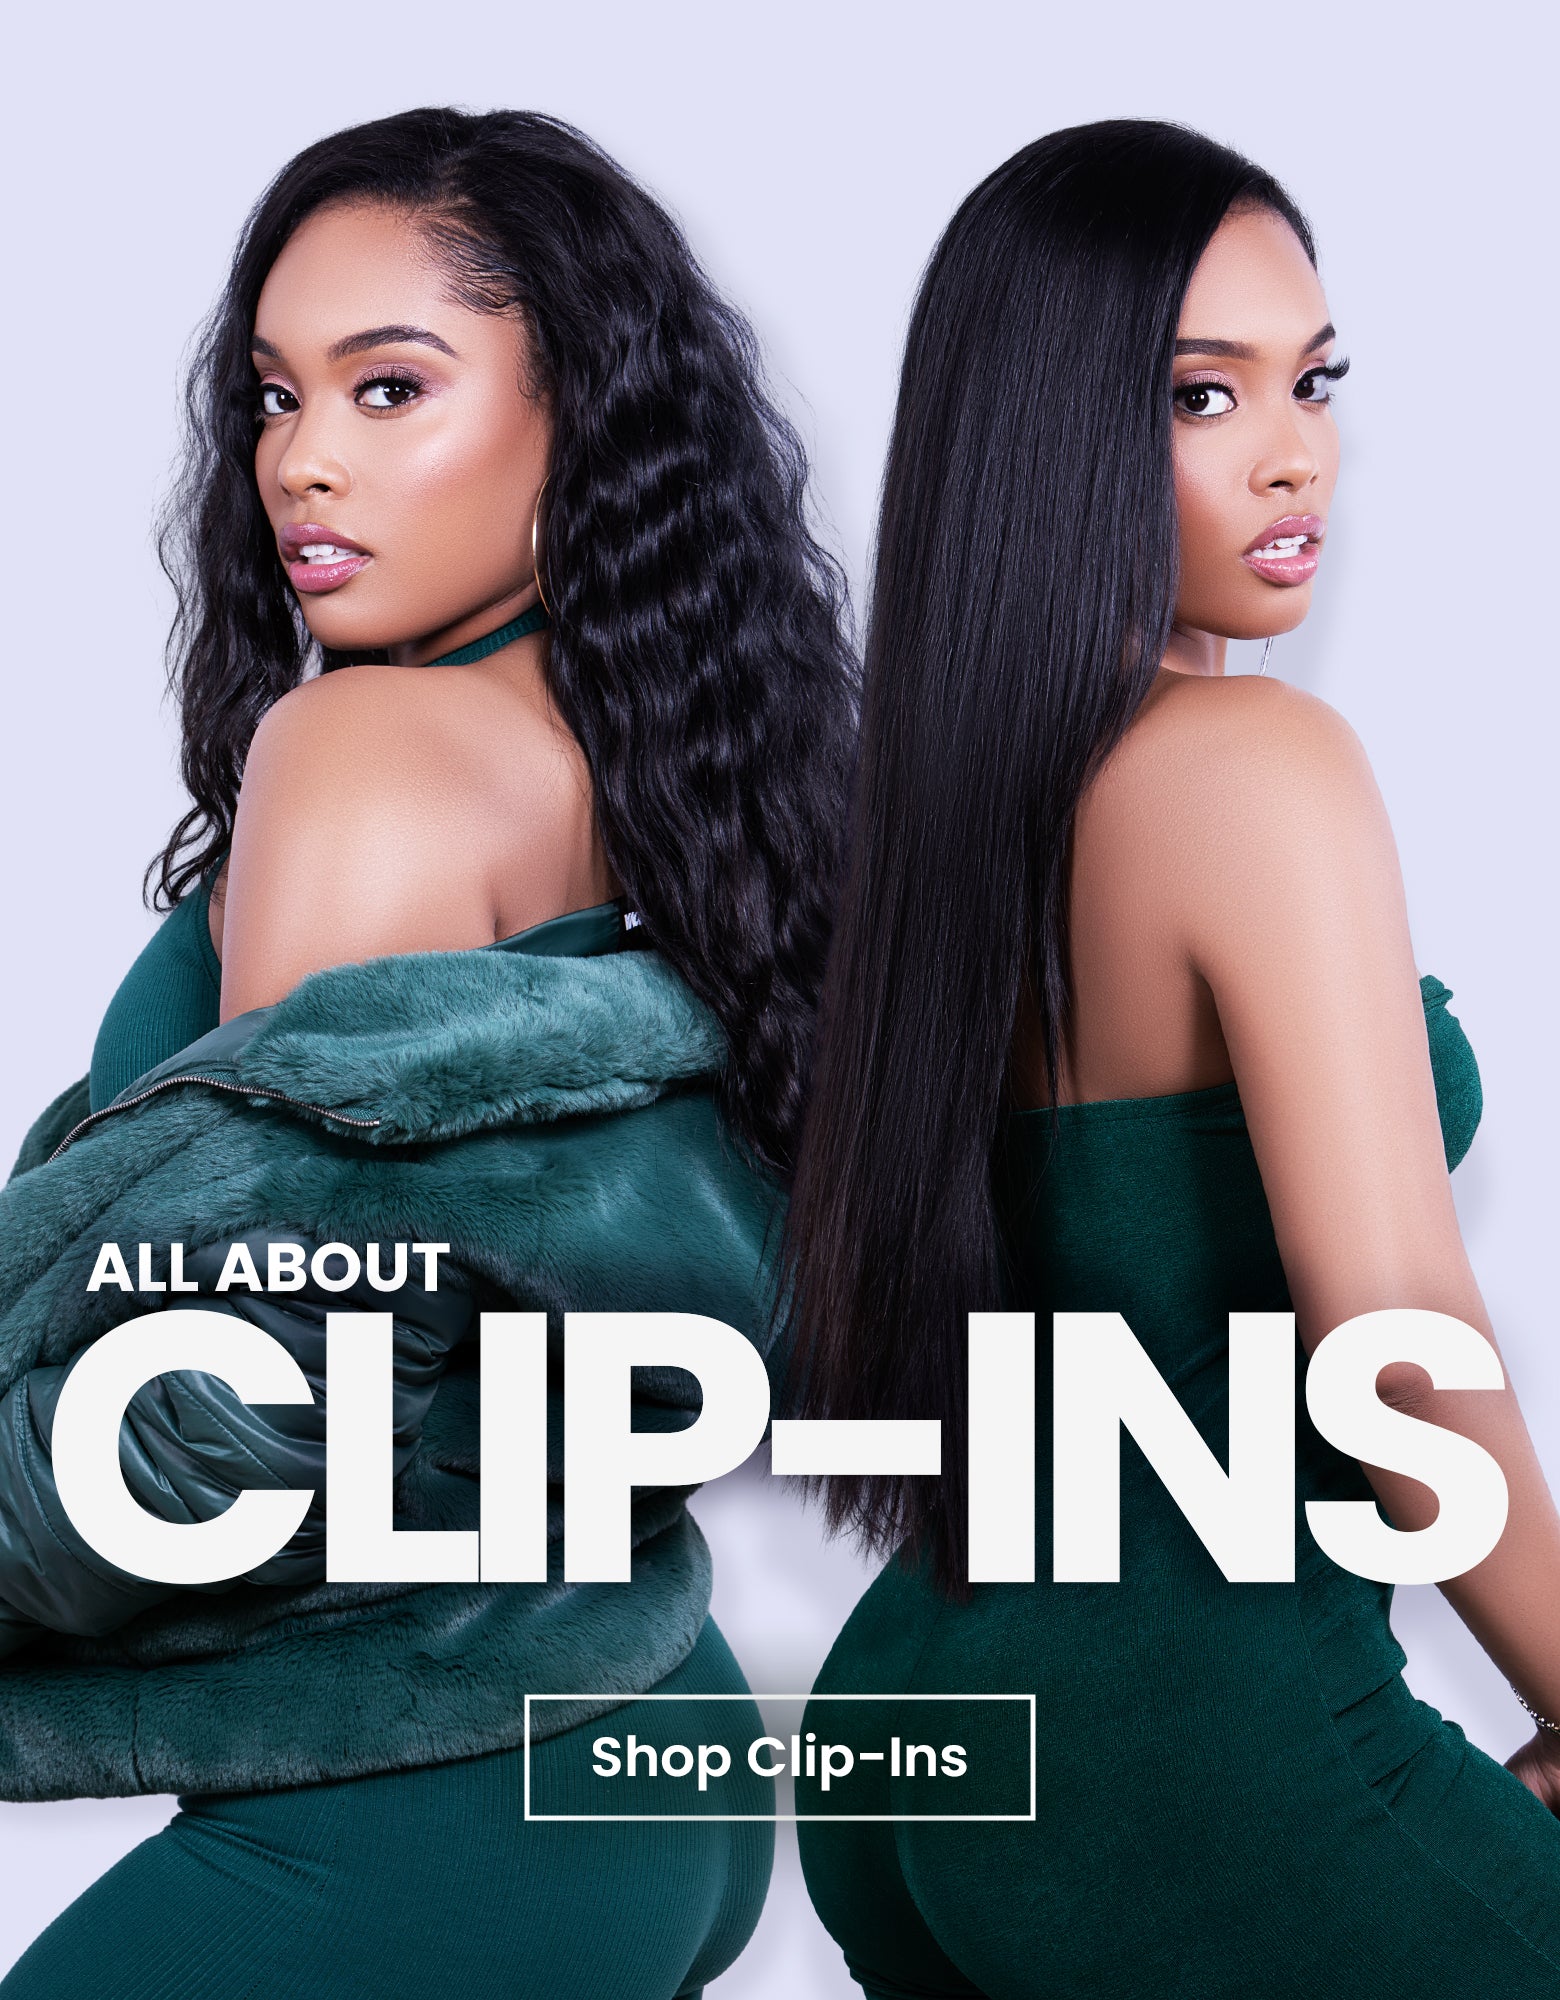 Clip-in Clips/Toupee Clips - Shop Salon Quality Hair & Beauty Products